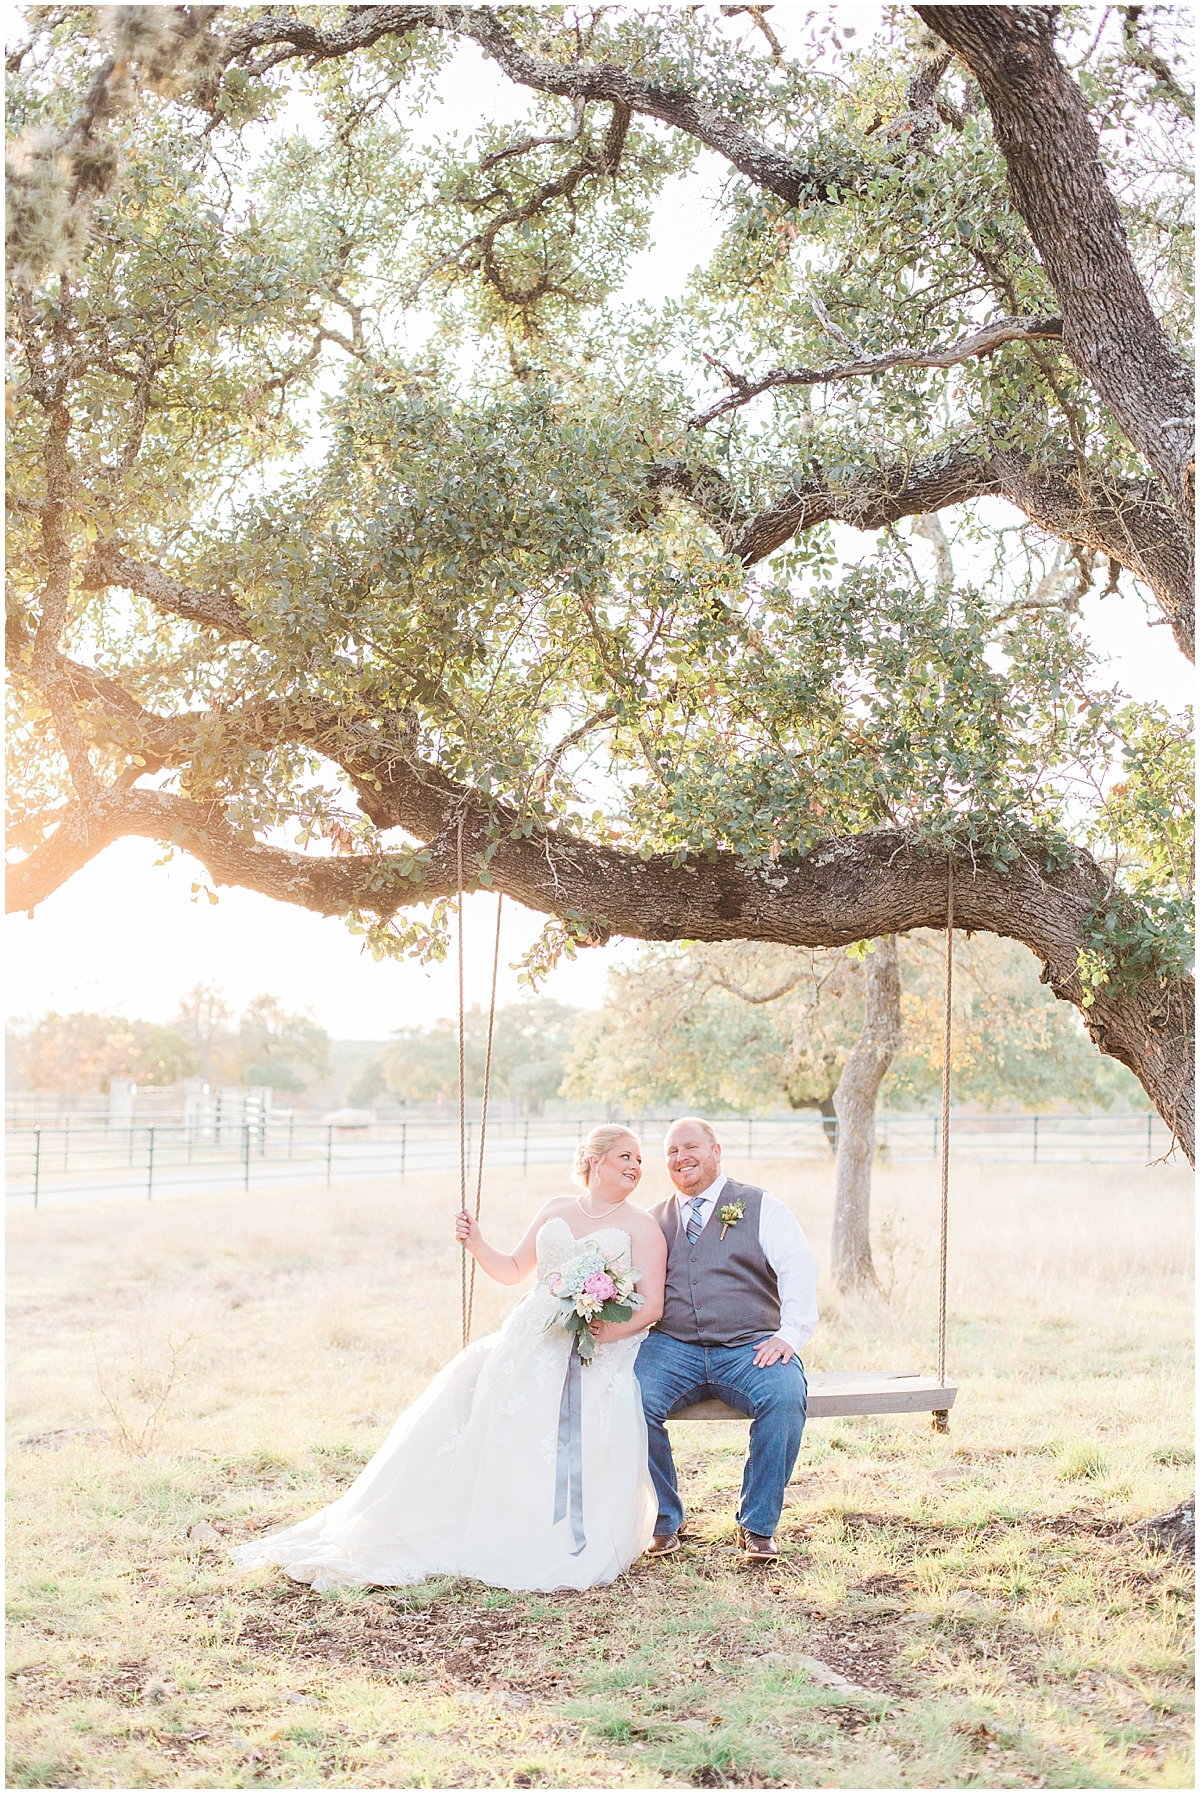 a-slate-blue-and-grey-winter-wedding-at-cw-hill-country-ranch-in-boerne-texas-by-allison-jeffers-wedding-photography_0082